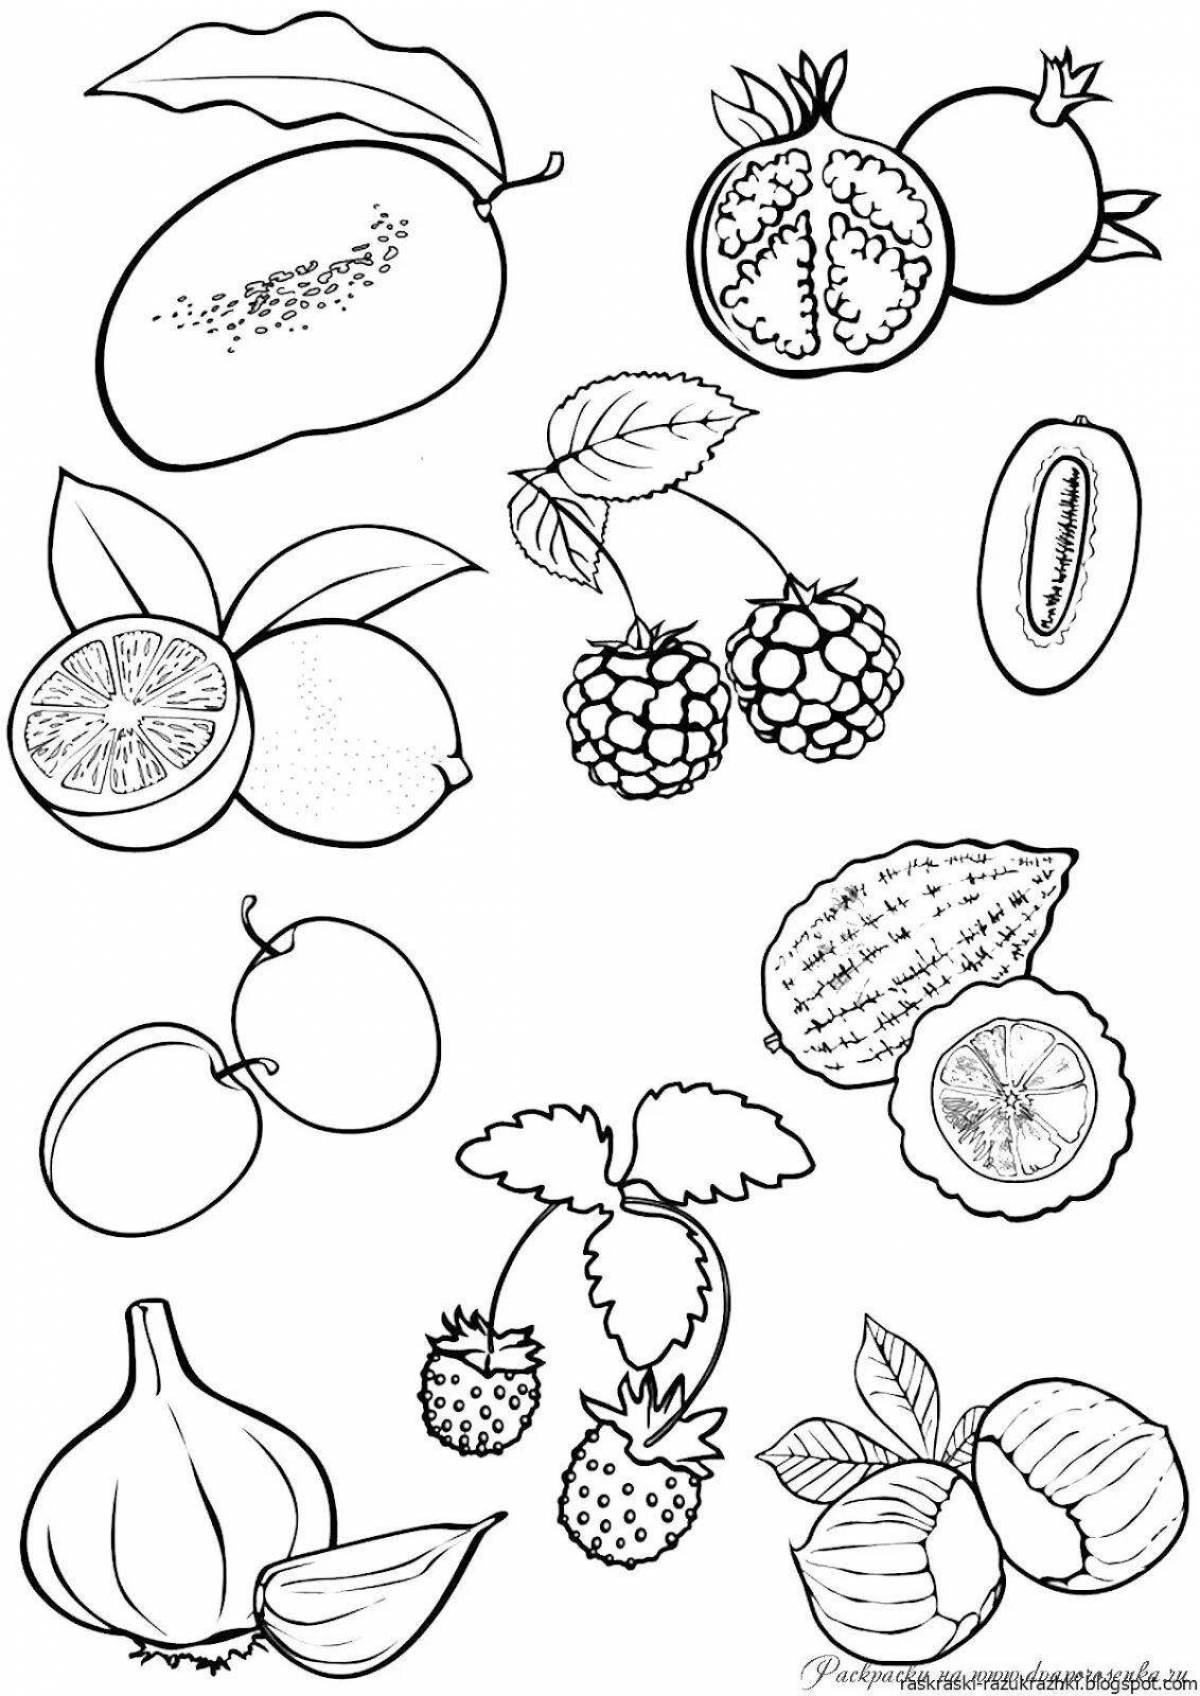 Colorful fruits and vegetables coloring book